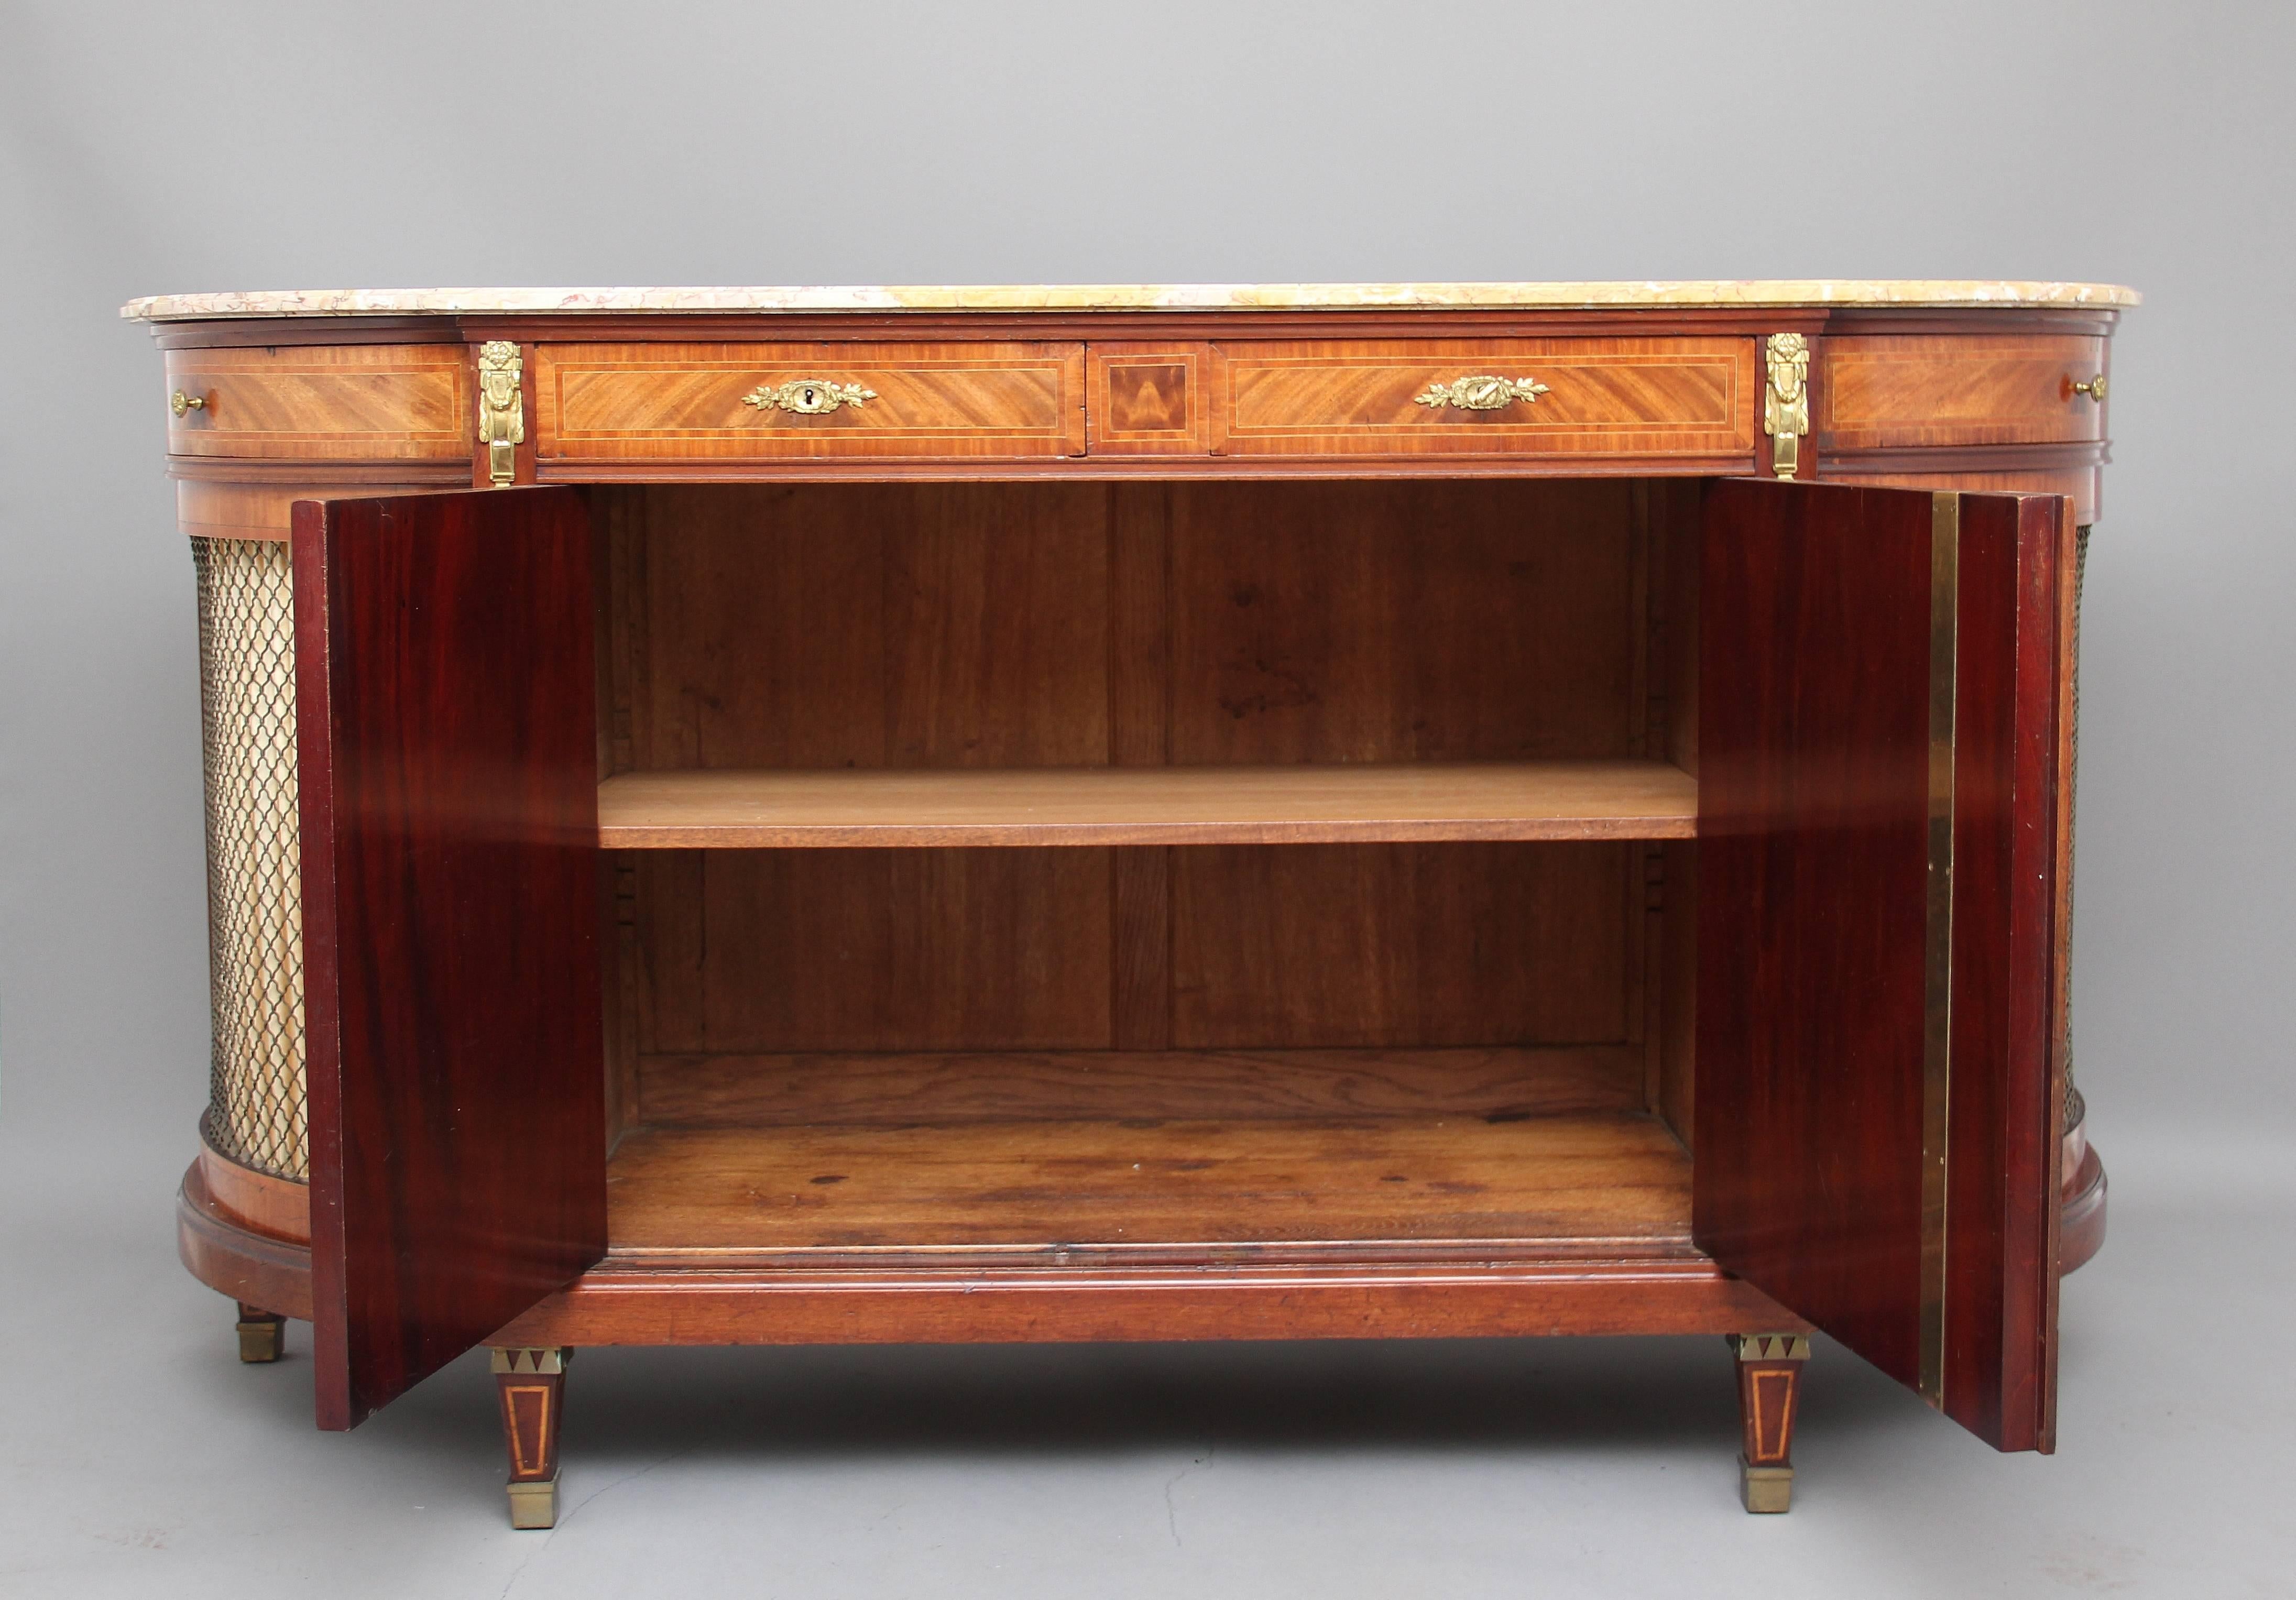 19th century French mahogany cabinet or credenza, the bow ends incorporating a drawer and a cupboard with brass grills, the centre with two drawers above a cupboard with two doors, it’s decorated with tulipwood and boxwood inlay and brass fittings,